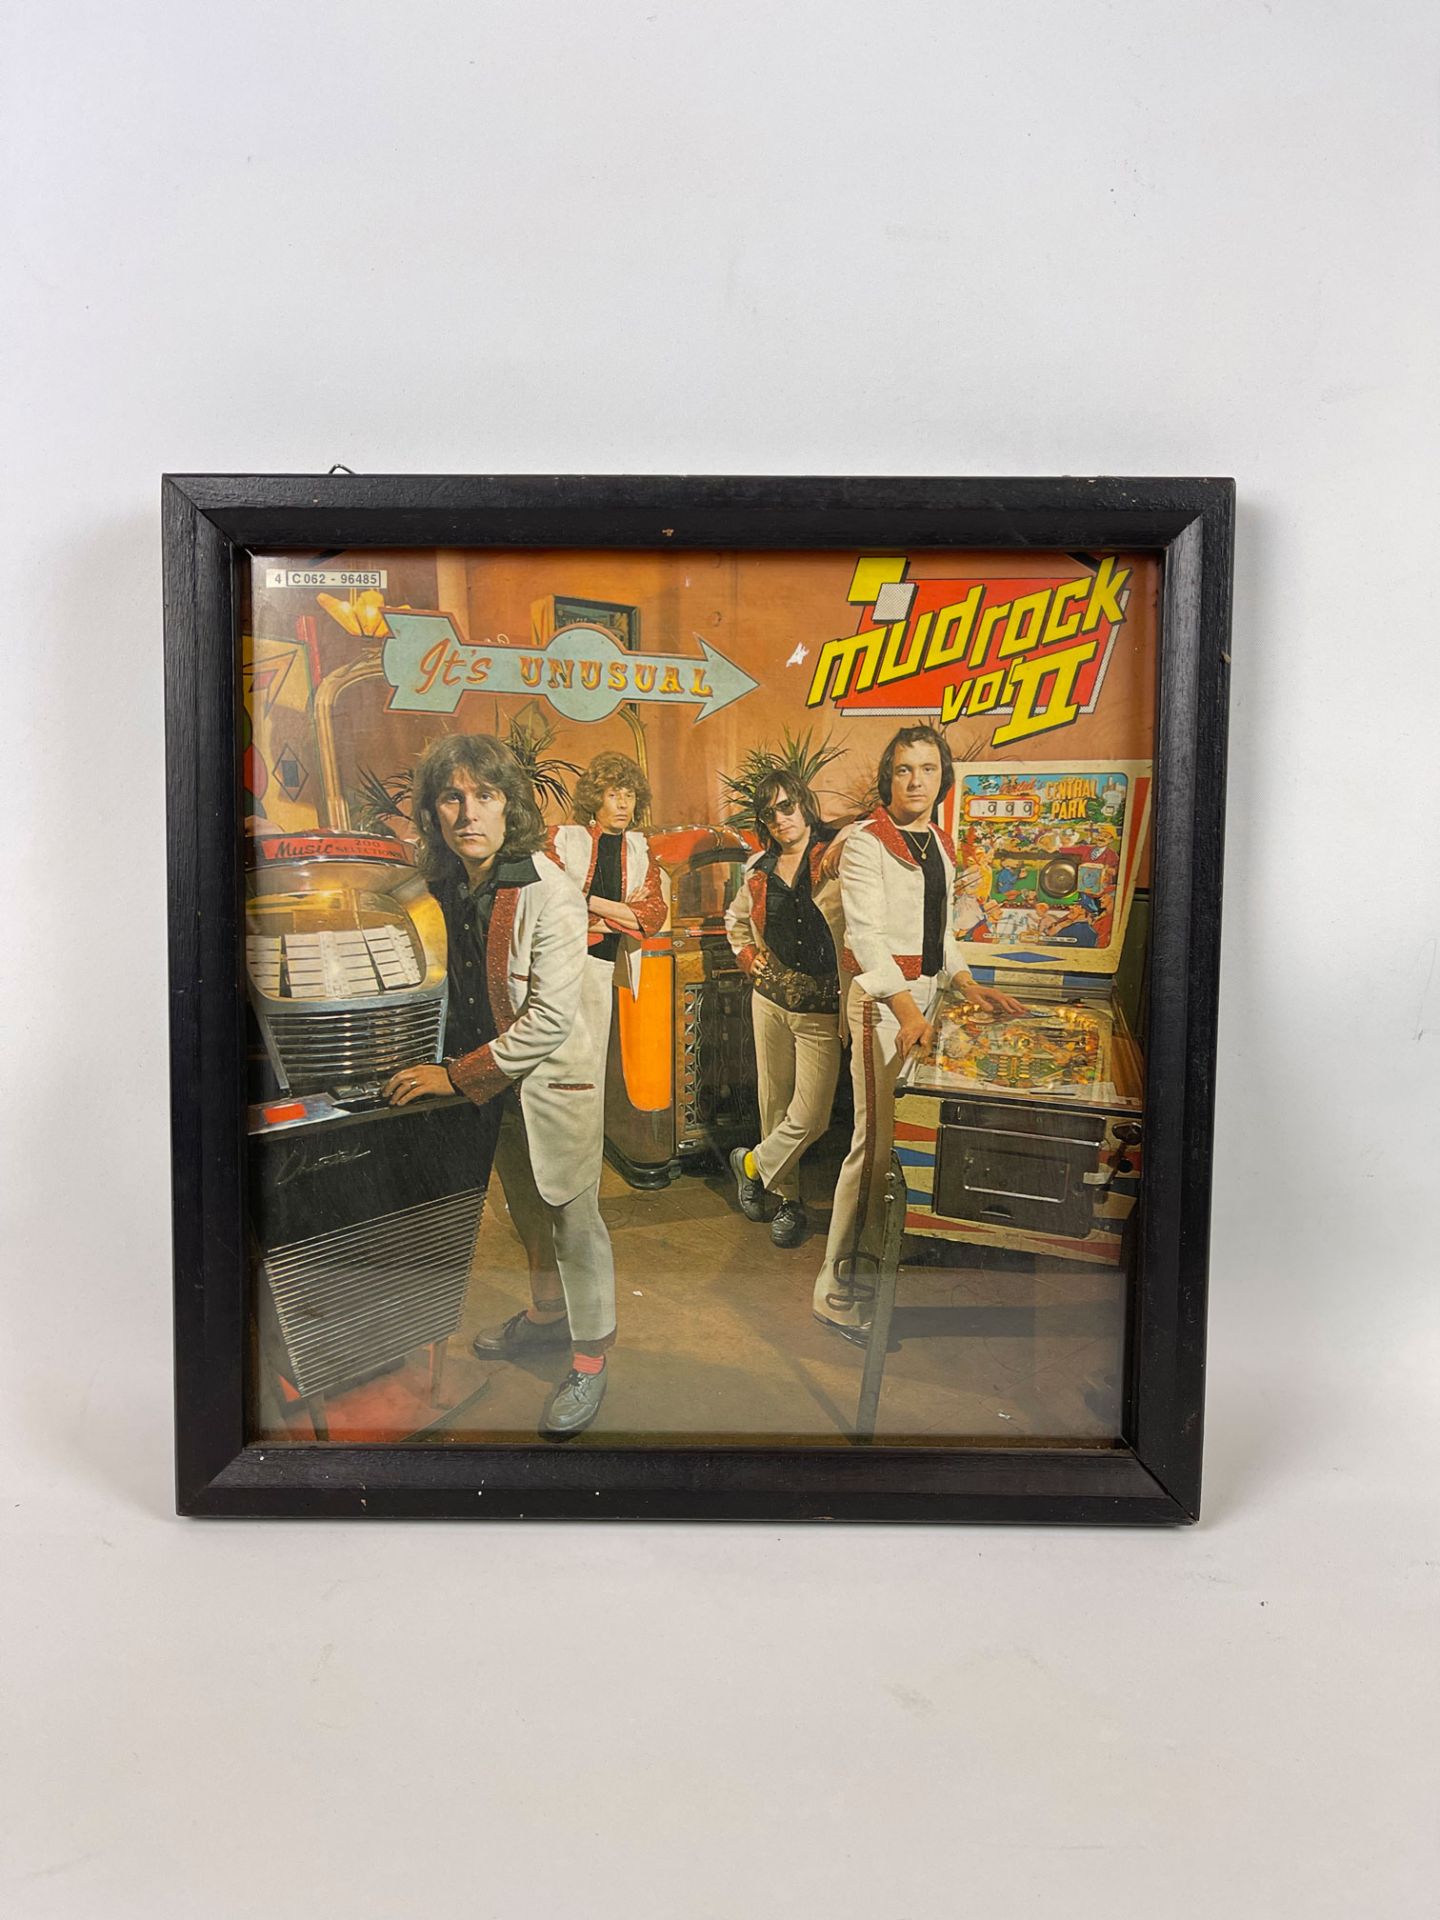 Framed 1975 Mud – Mud Rock Vol. II Record Cover - Image 2 of 3